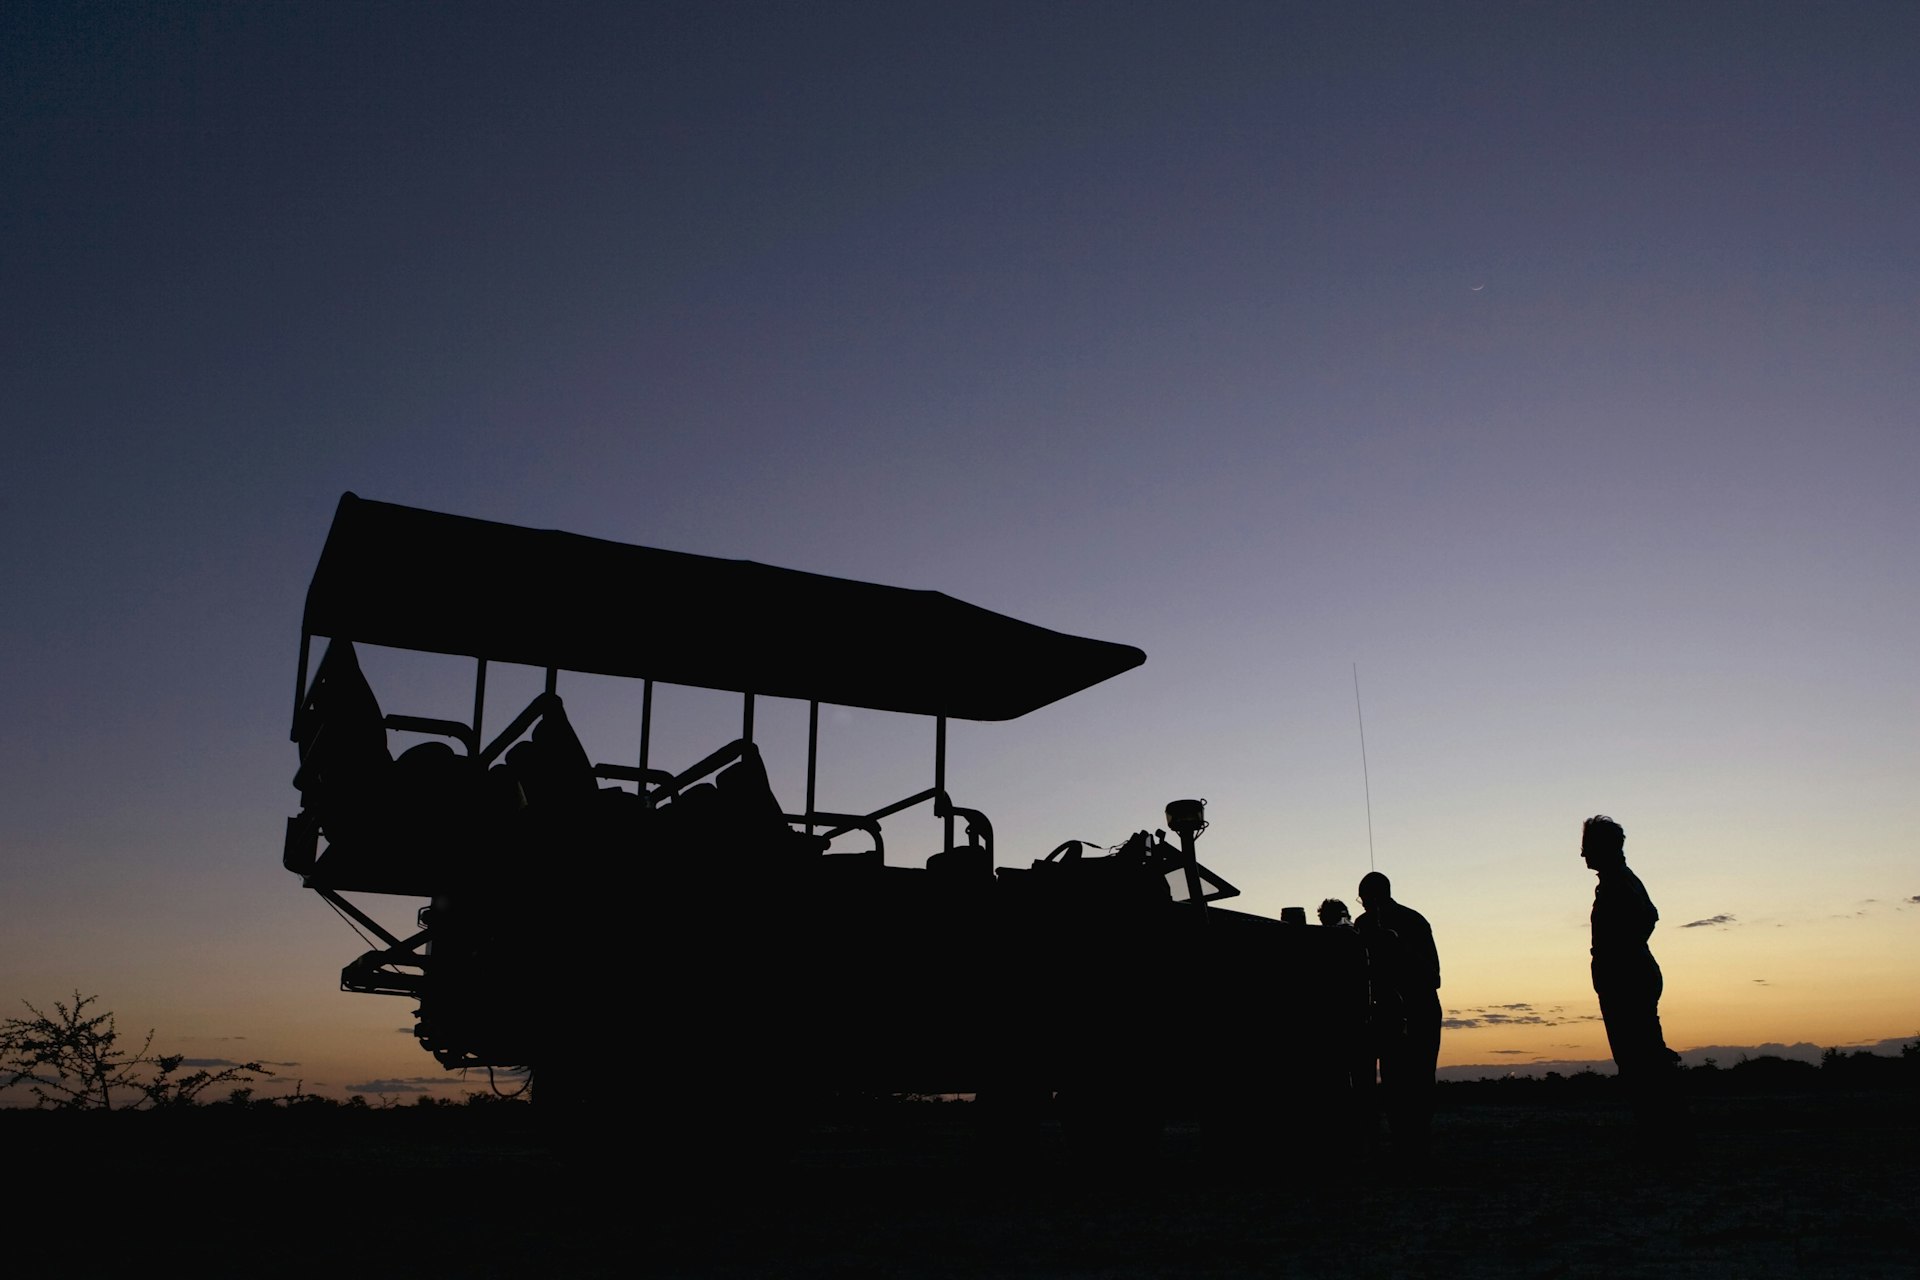 4x4 game viewer and tourists silhouetted at sunset, Okavango Delta, Botswana 